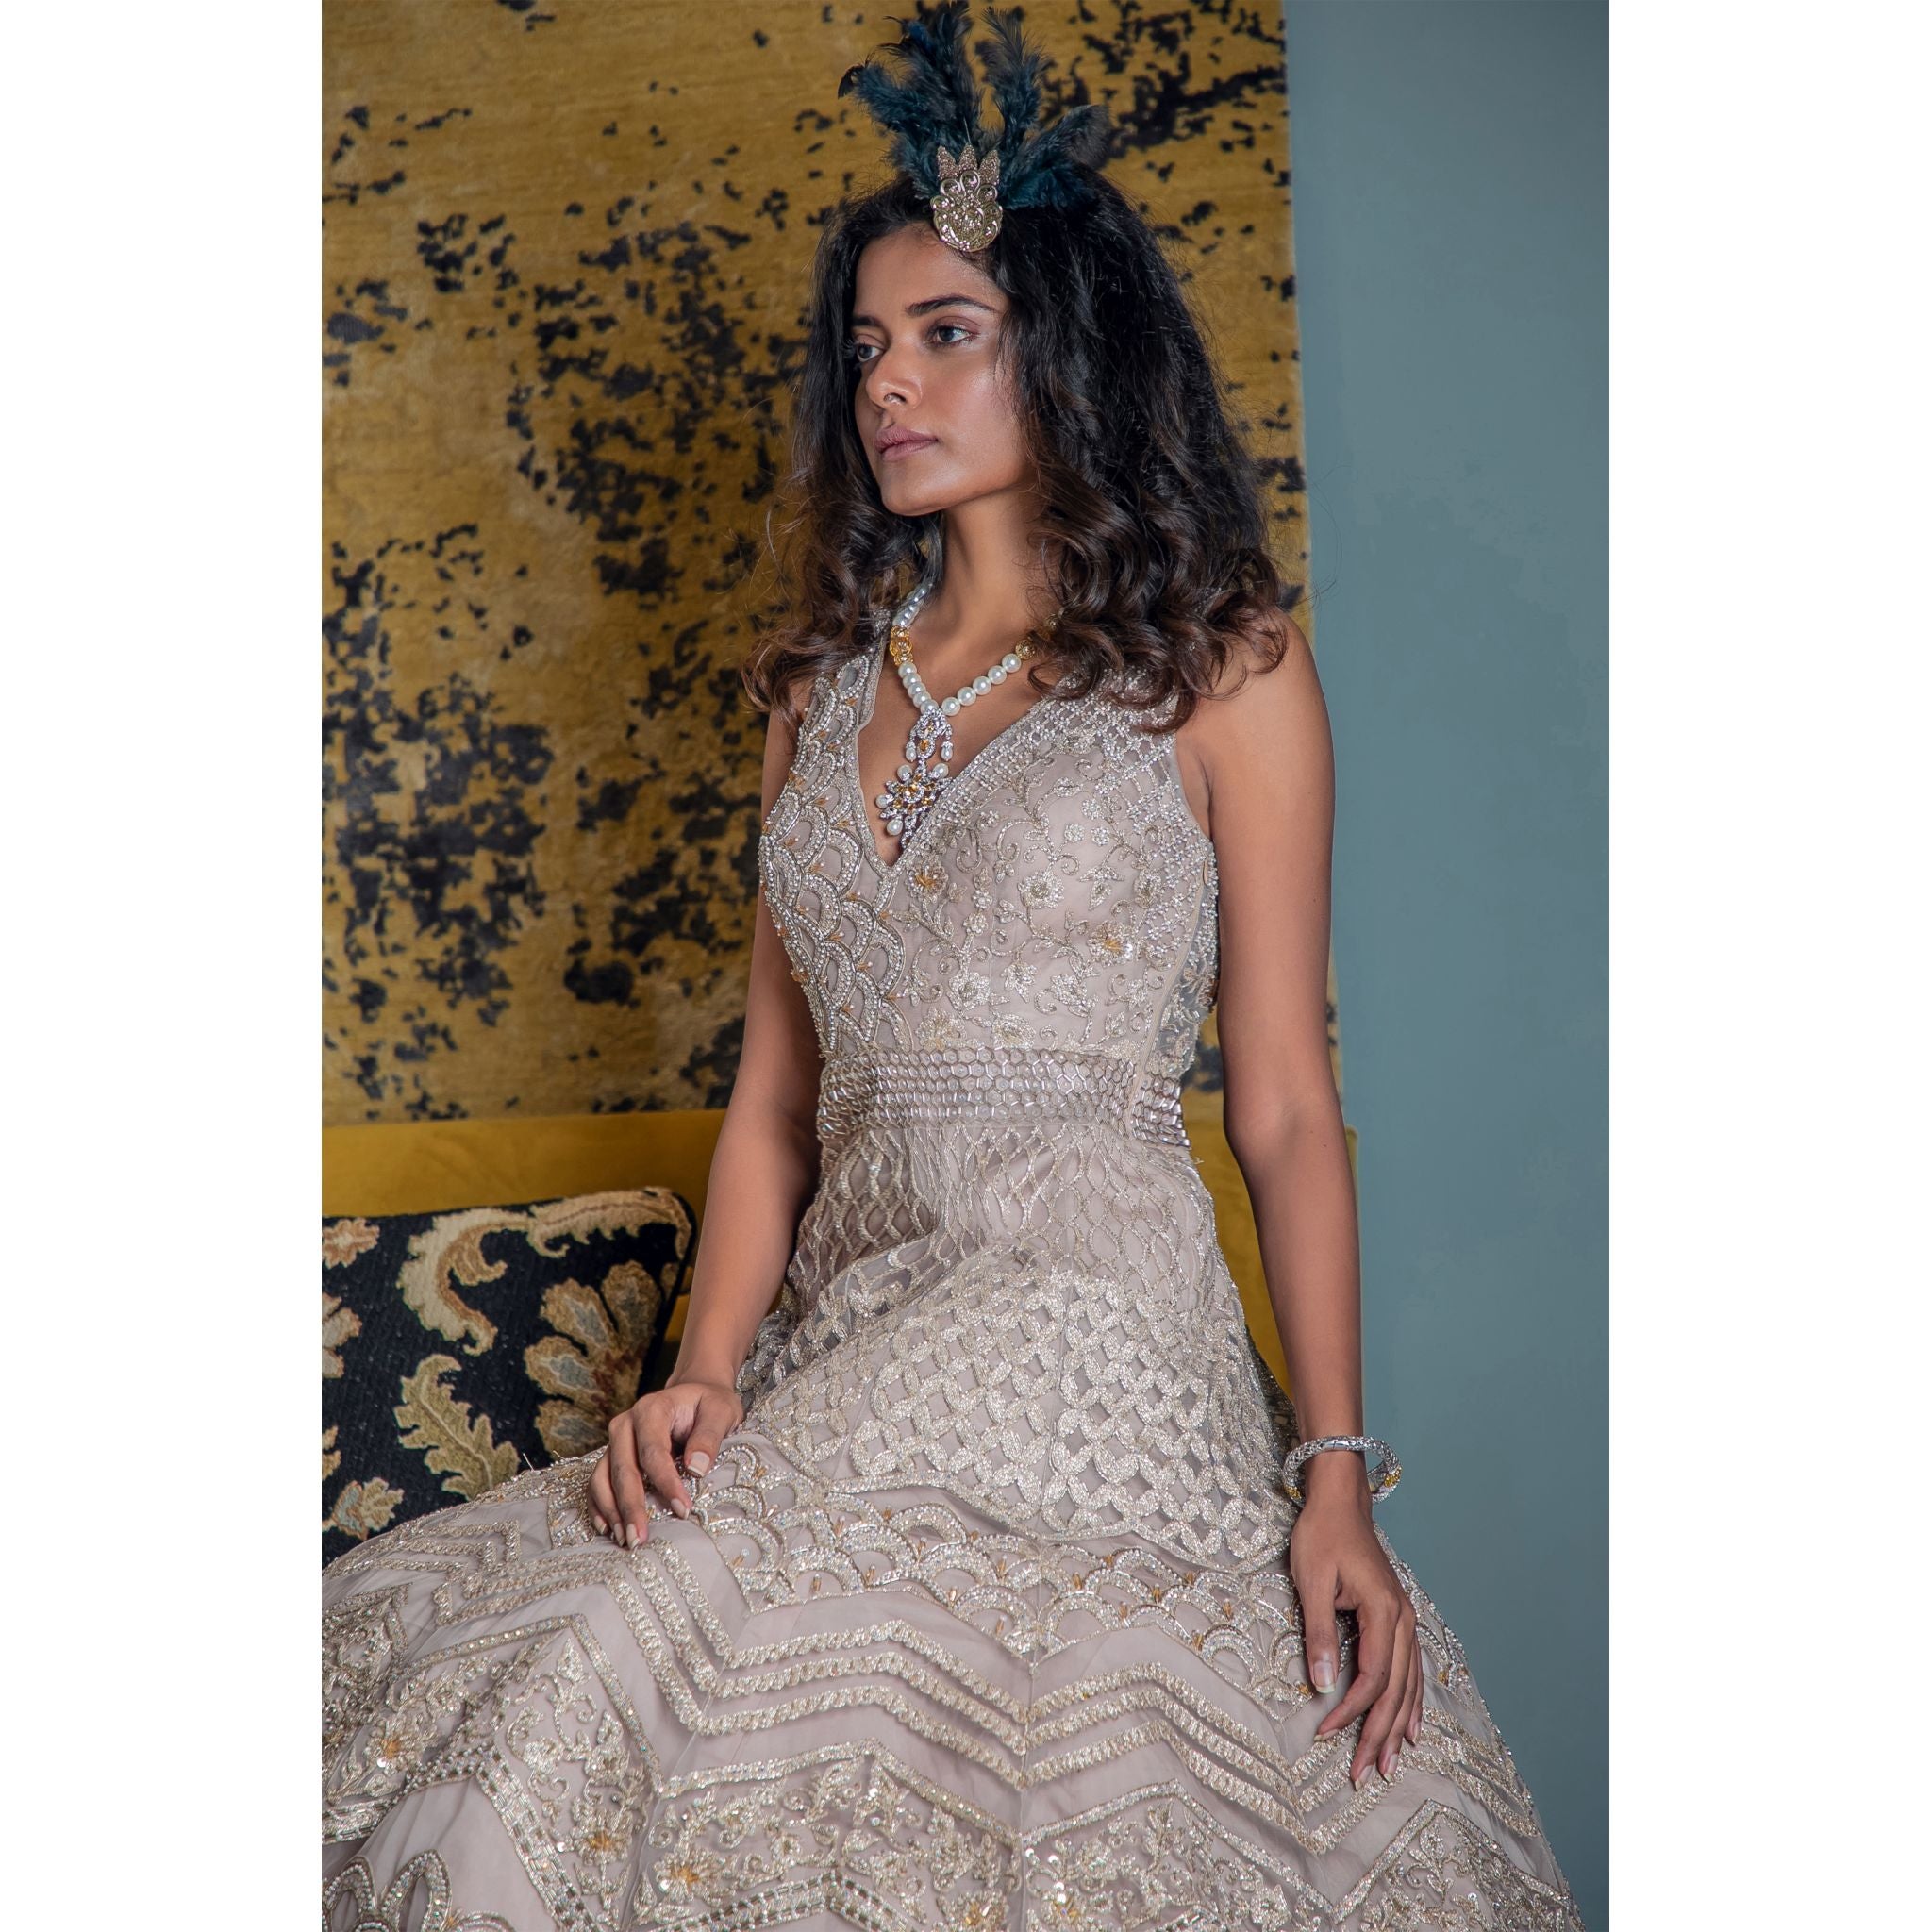 Beige Geometric Embroidered Gown - Indian Designer Bridal Wedding Outfit